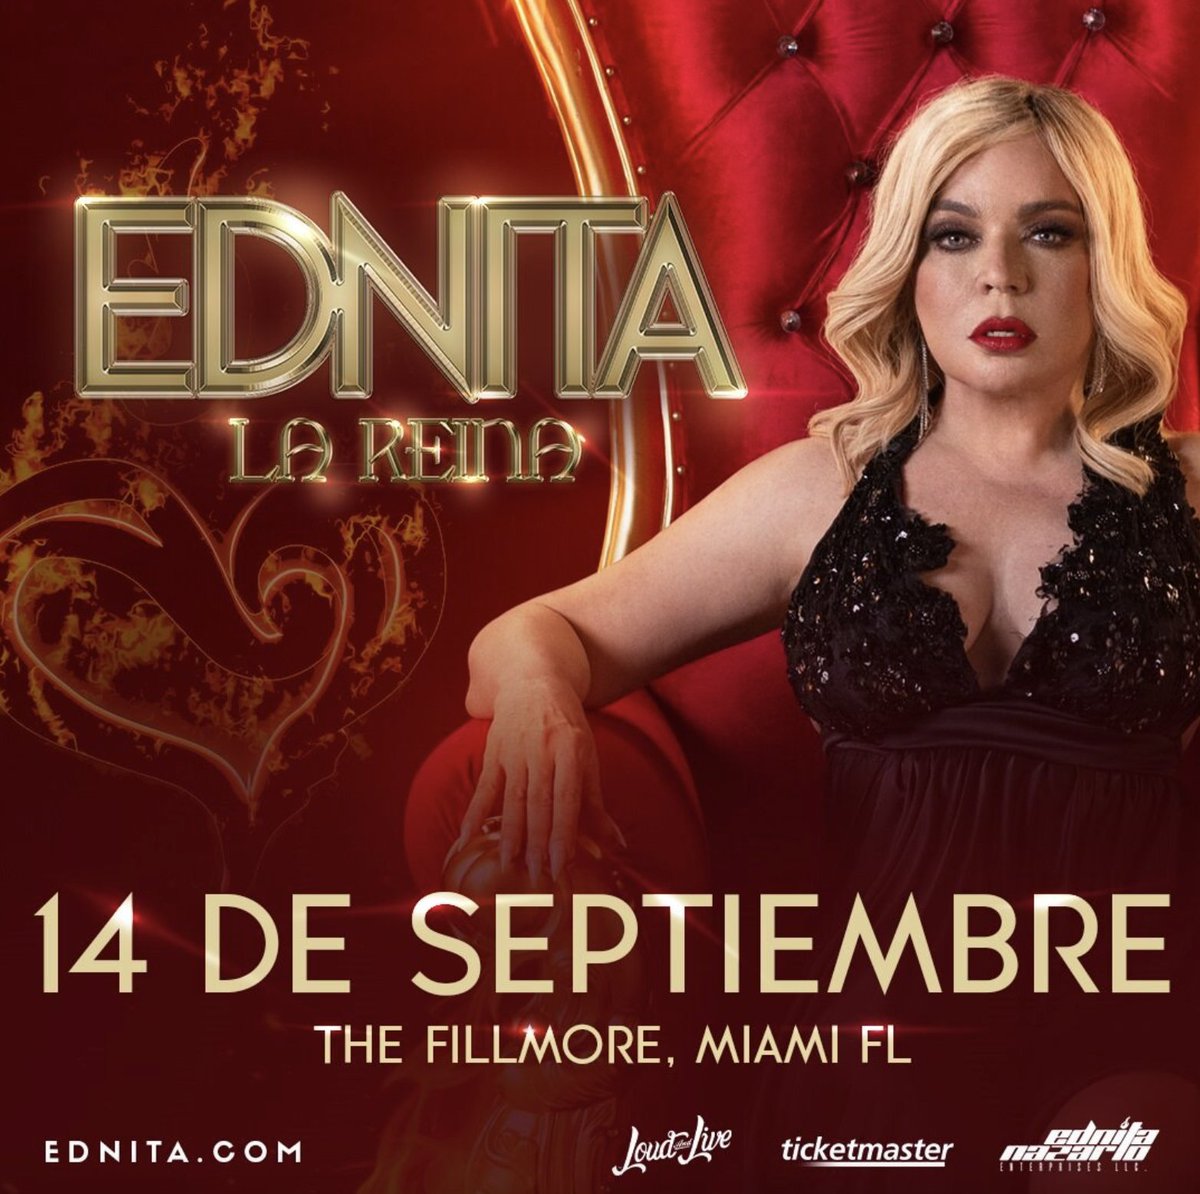 Just Announced! Ednita Nazario - La Reina at The Fillmore Miami Beach on Saturday, September 14th! 🌹 ★ Live Nation Presale Wednesday 10am (Code: SOUNDCHECK) ★ On Sale Friday 10am 👉livemu.sc/3QnJg5T